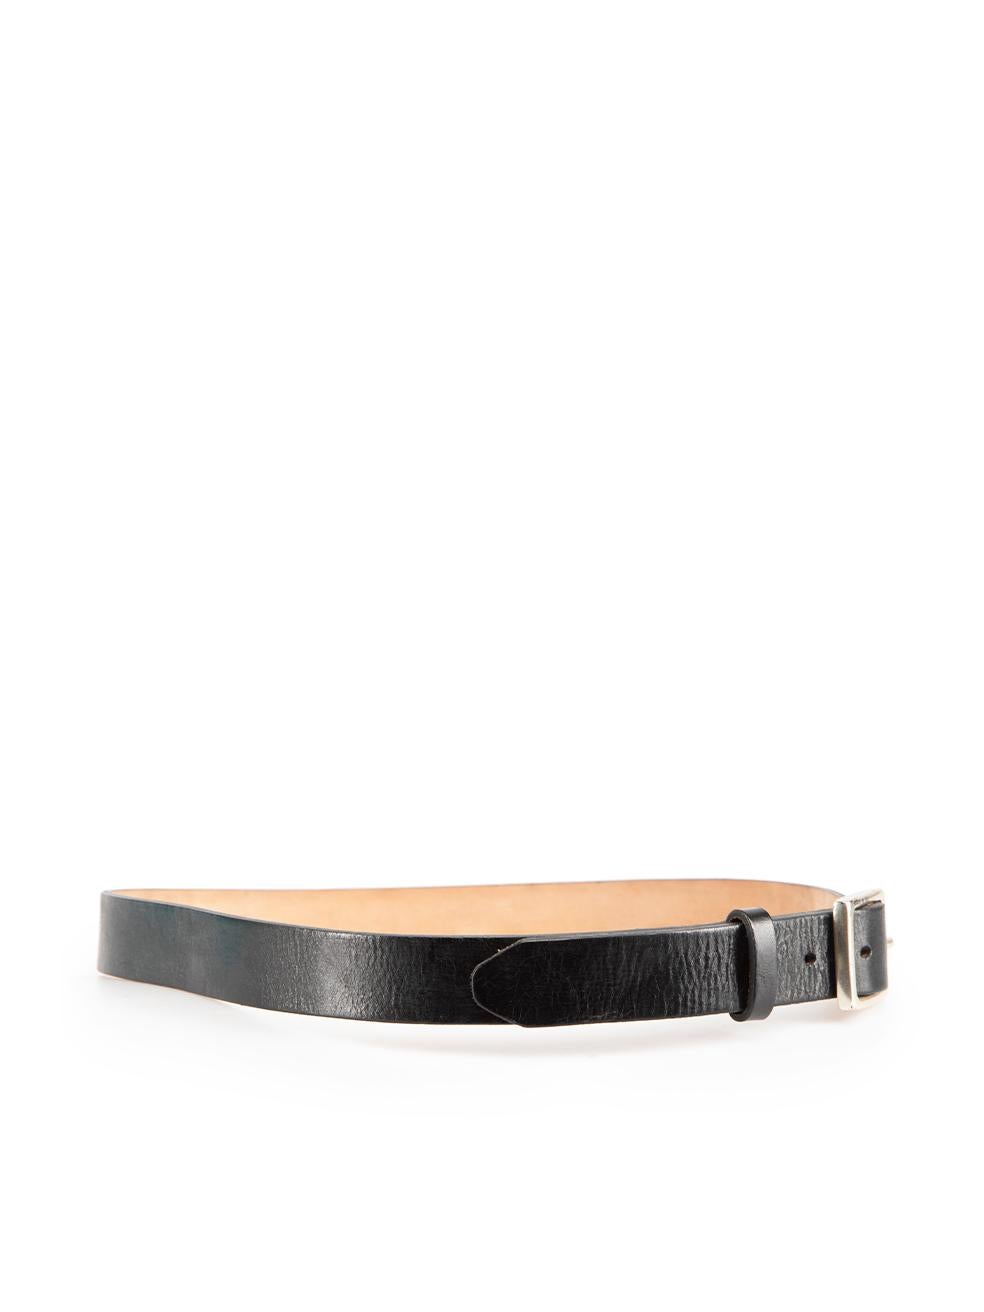 CONDITION is Very good. Minimal wear to belt is evident. Minimal wear to the left-side of belt with a matte patch to the leather. The underside of belt also has discoloured marks on this used Rag & Bone designer resale item. Please note that the